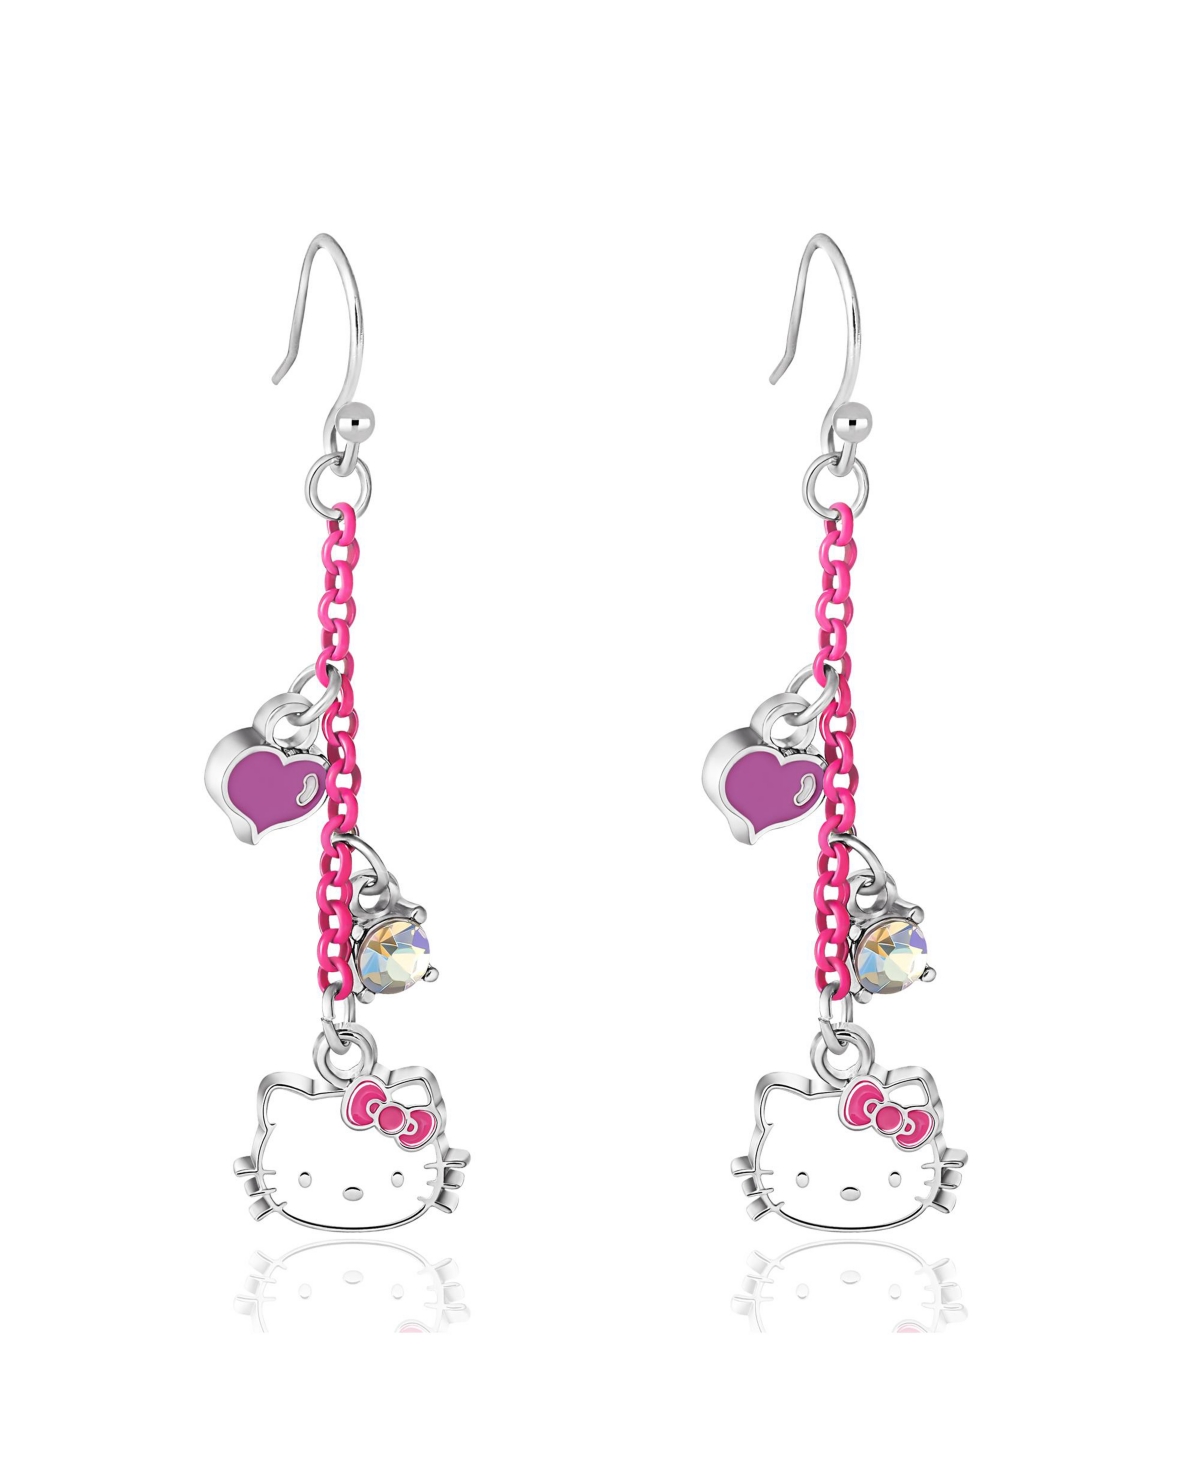 Sanrio Hello Kitty Womens Pink Dangle Earrings with Charms - Officially Licensed Authentic - Pink, purple, white